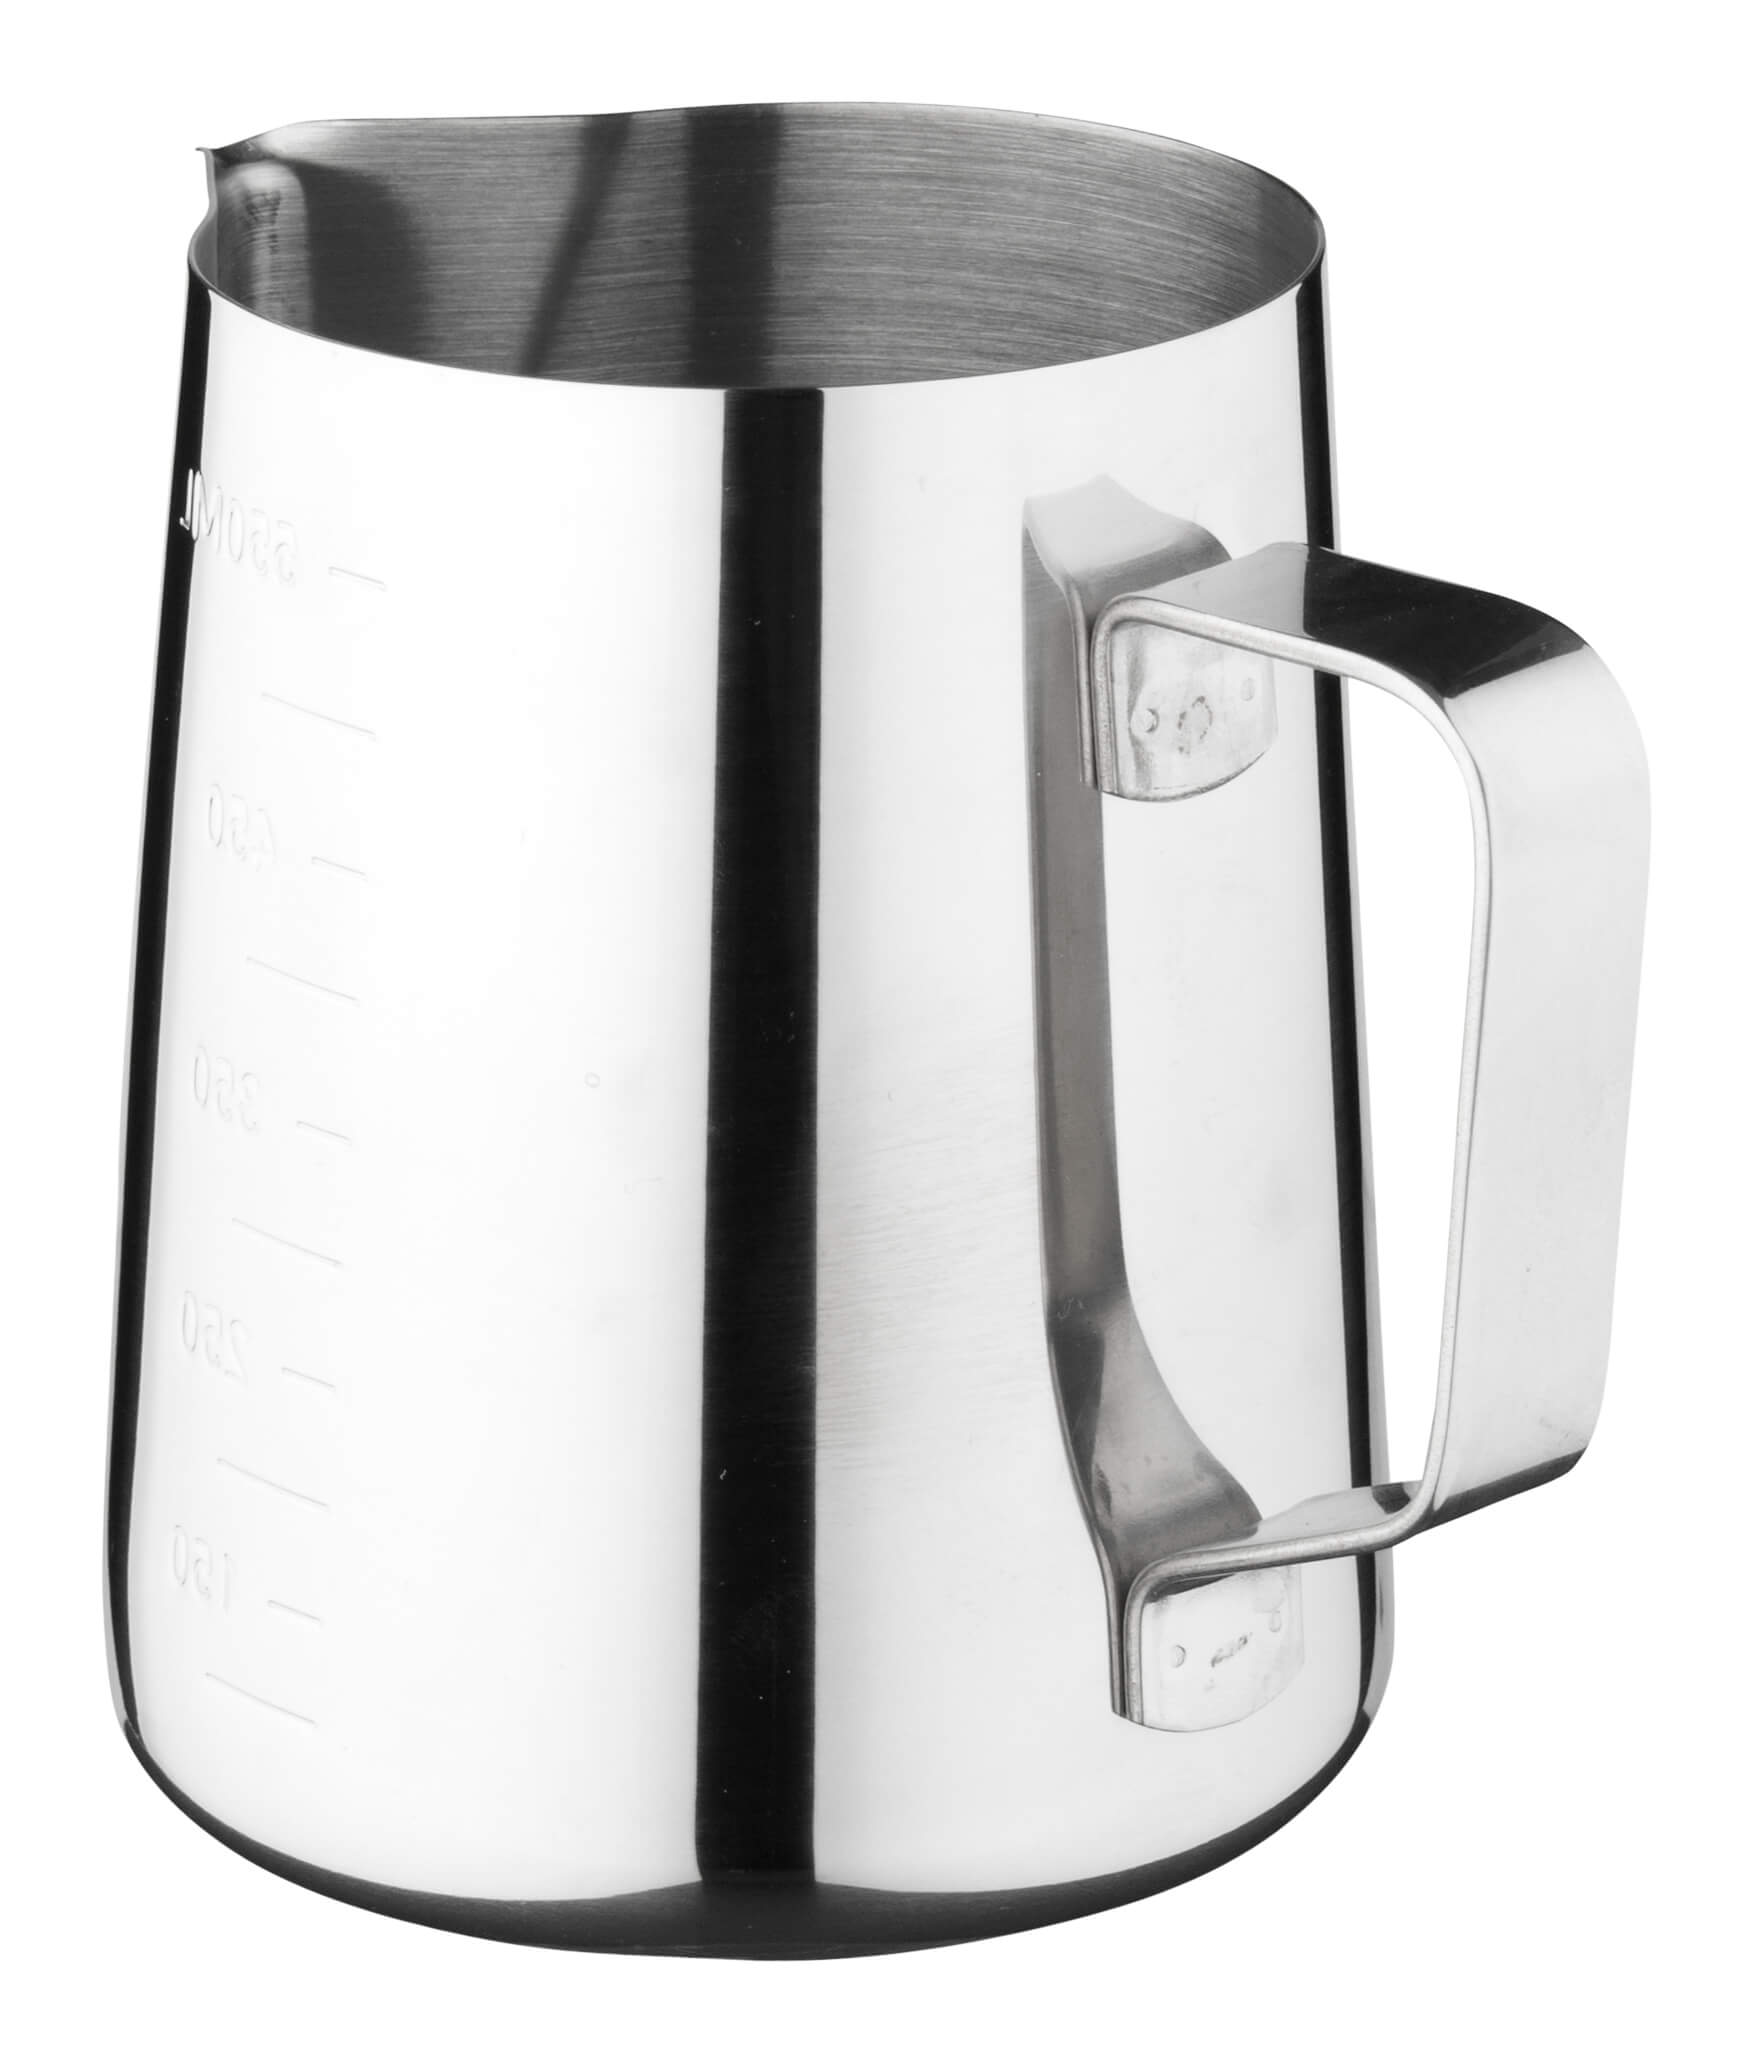 Milk jug, stainless steel with scaling - 600ml